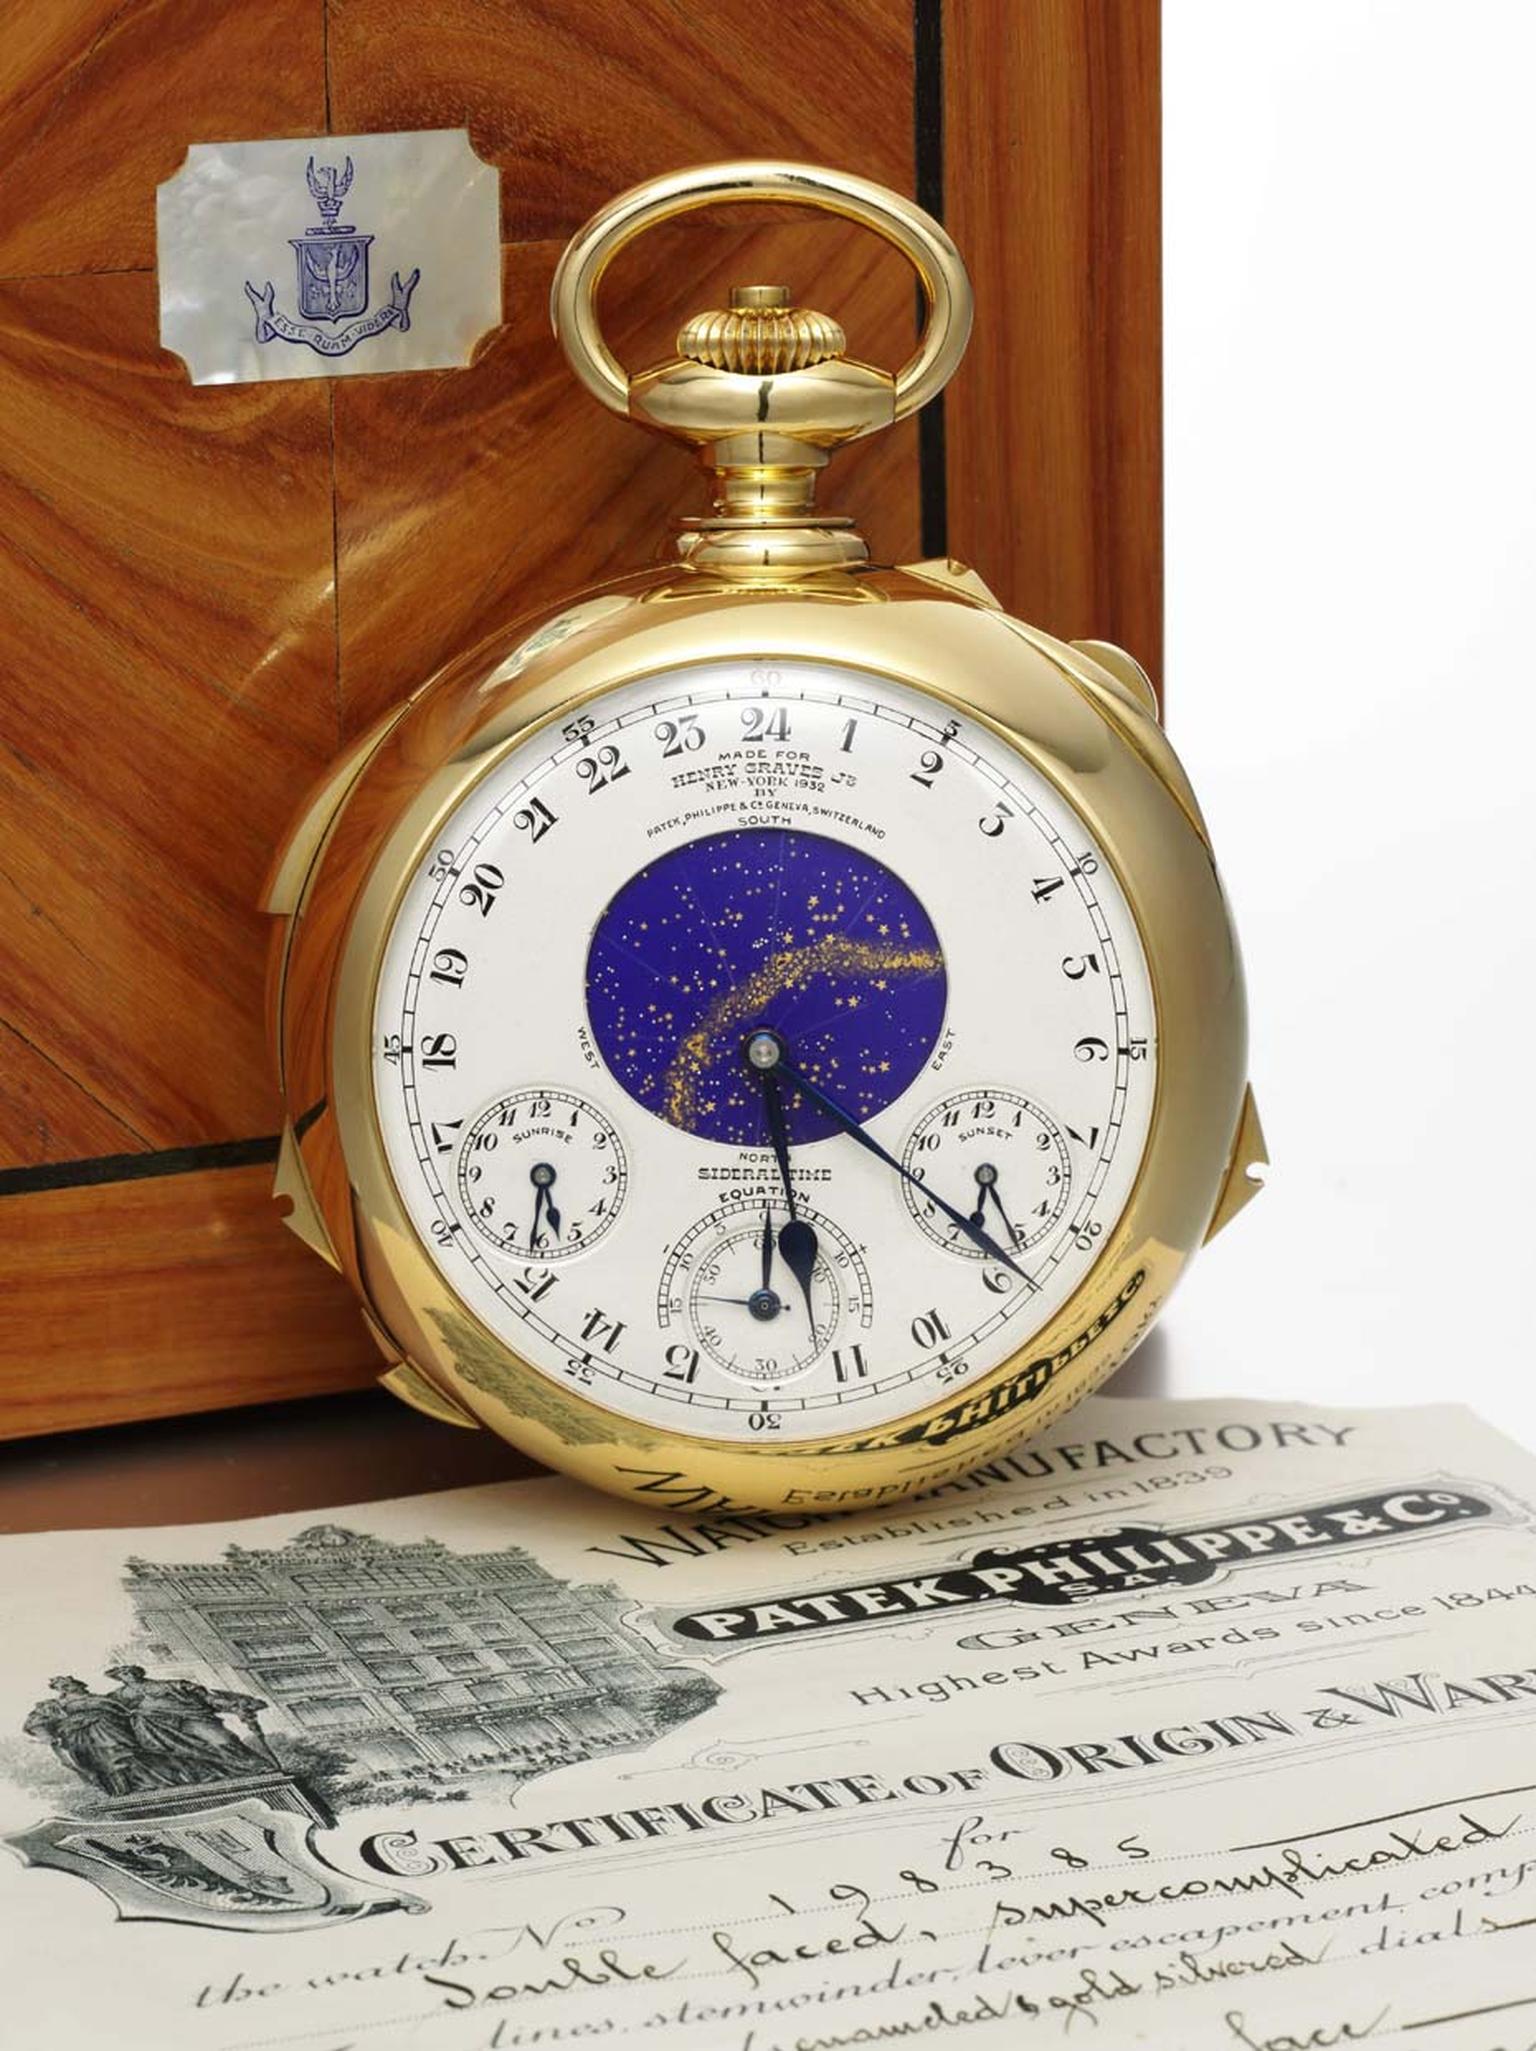 On 11 November 2014, Sotheby’s Geneva made history when it sold the Henry Graves Supercomplication, the world’s most expensive and coveted pocket watch, for an astronomical $24 million.